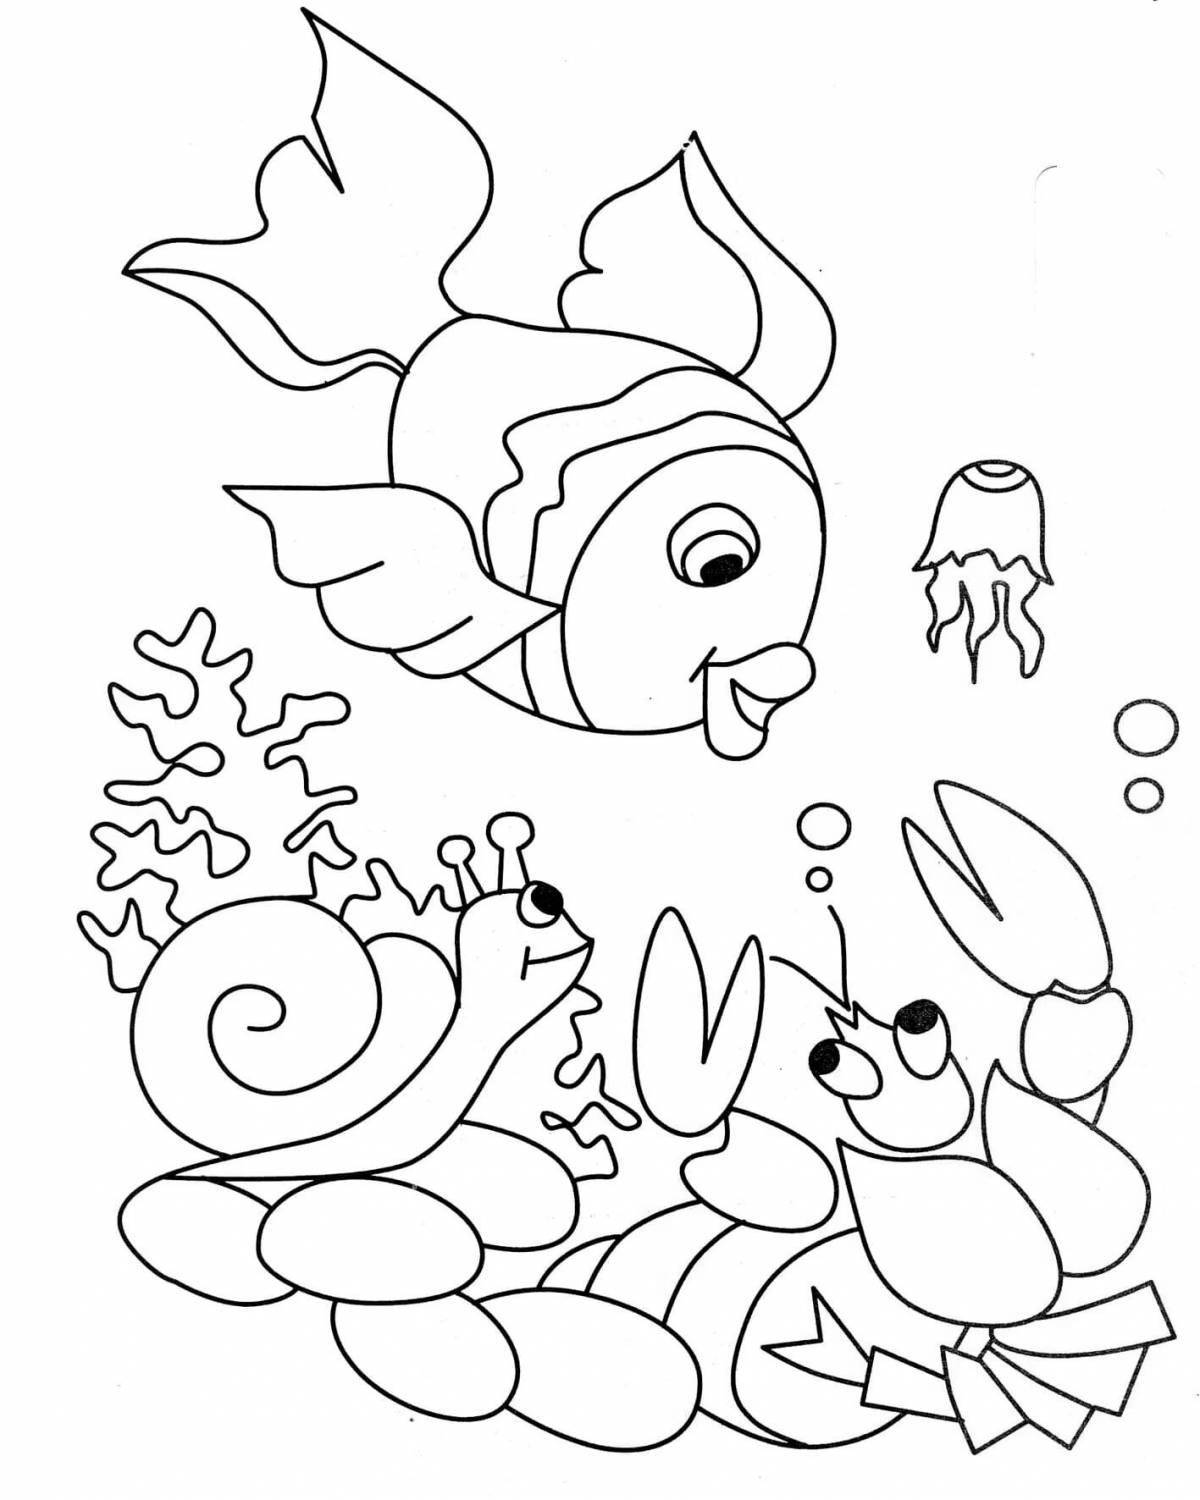 Dazzling fish coloring book for girls